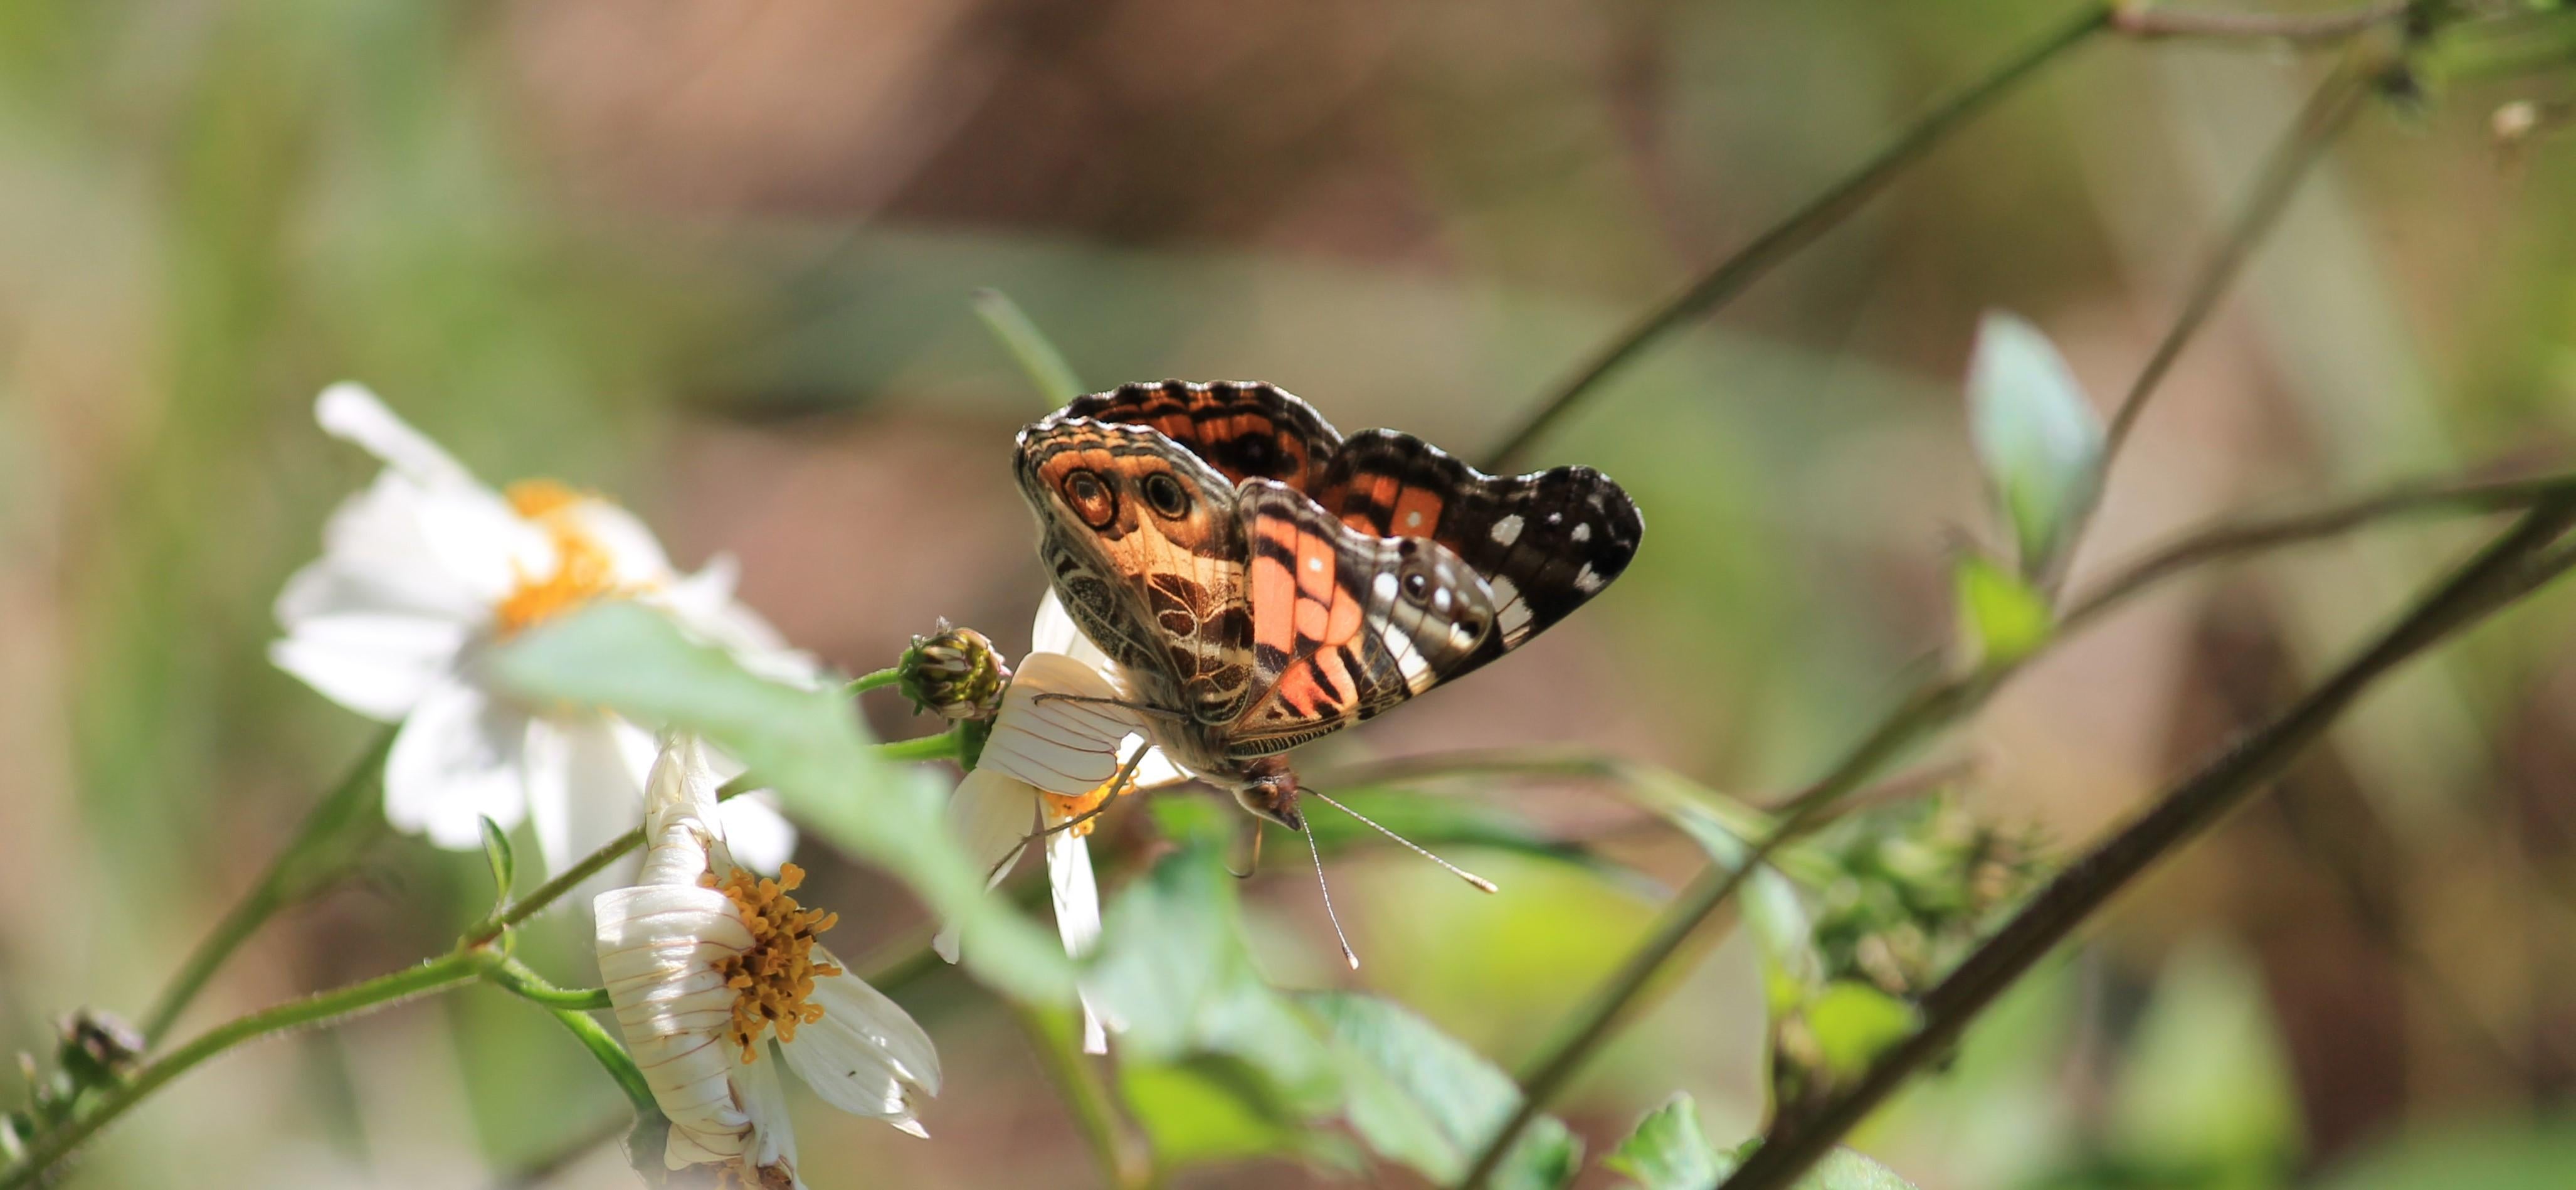 American Lady Butterfly Resting on a Flower. Photo by Farren Dell